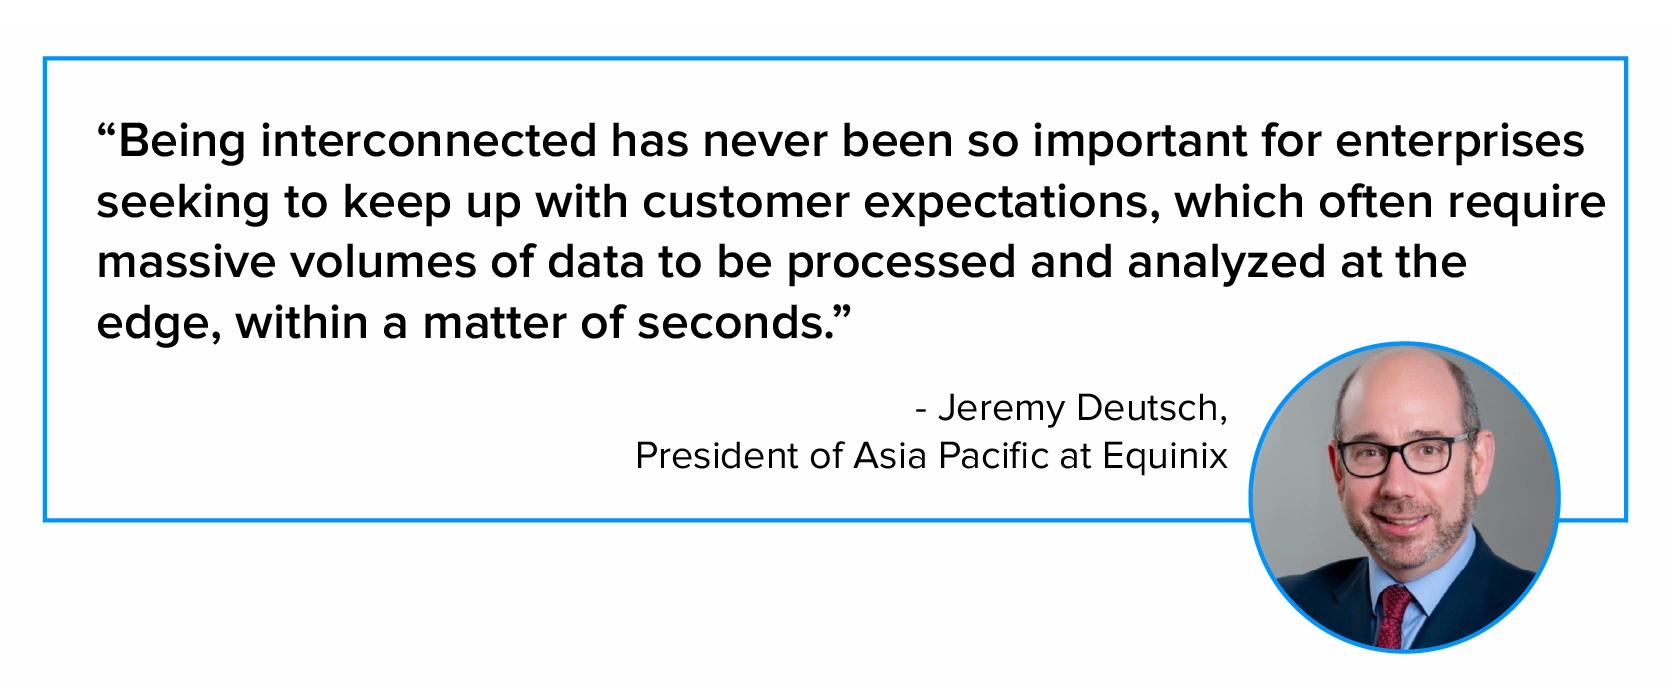 Jeremy Deutsch, President of Asia Pacific at Equinix